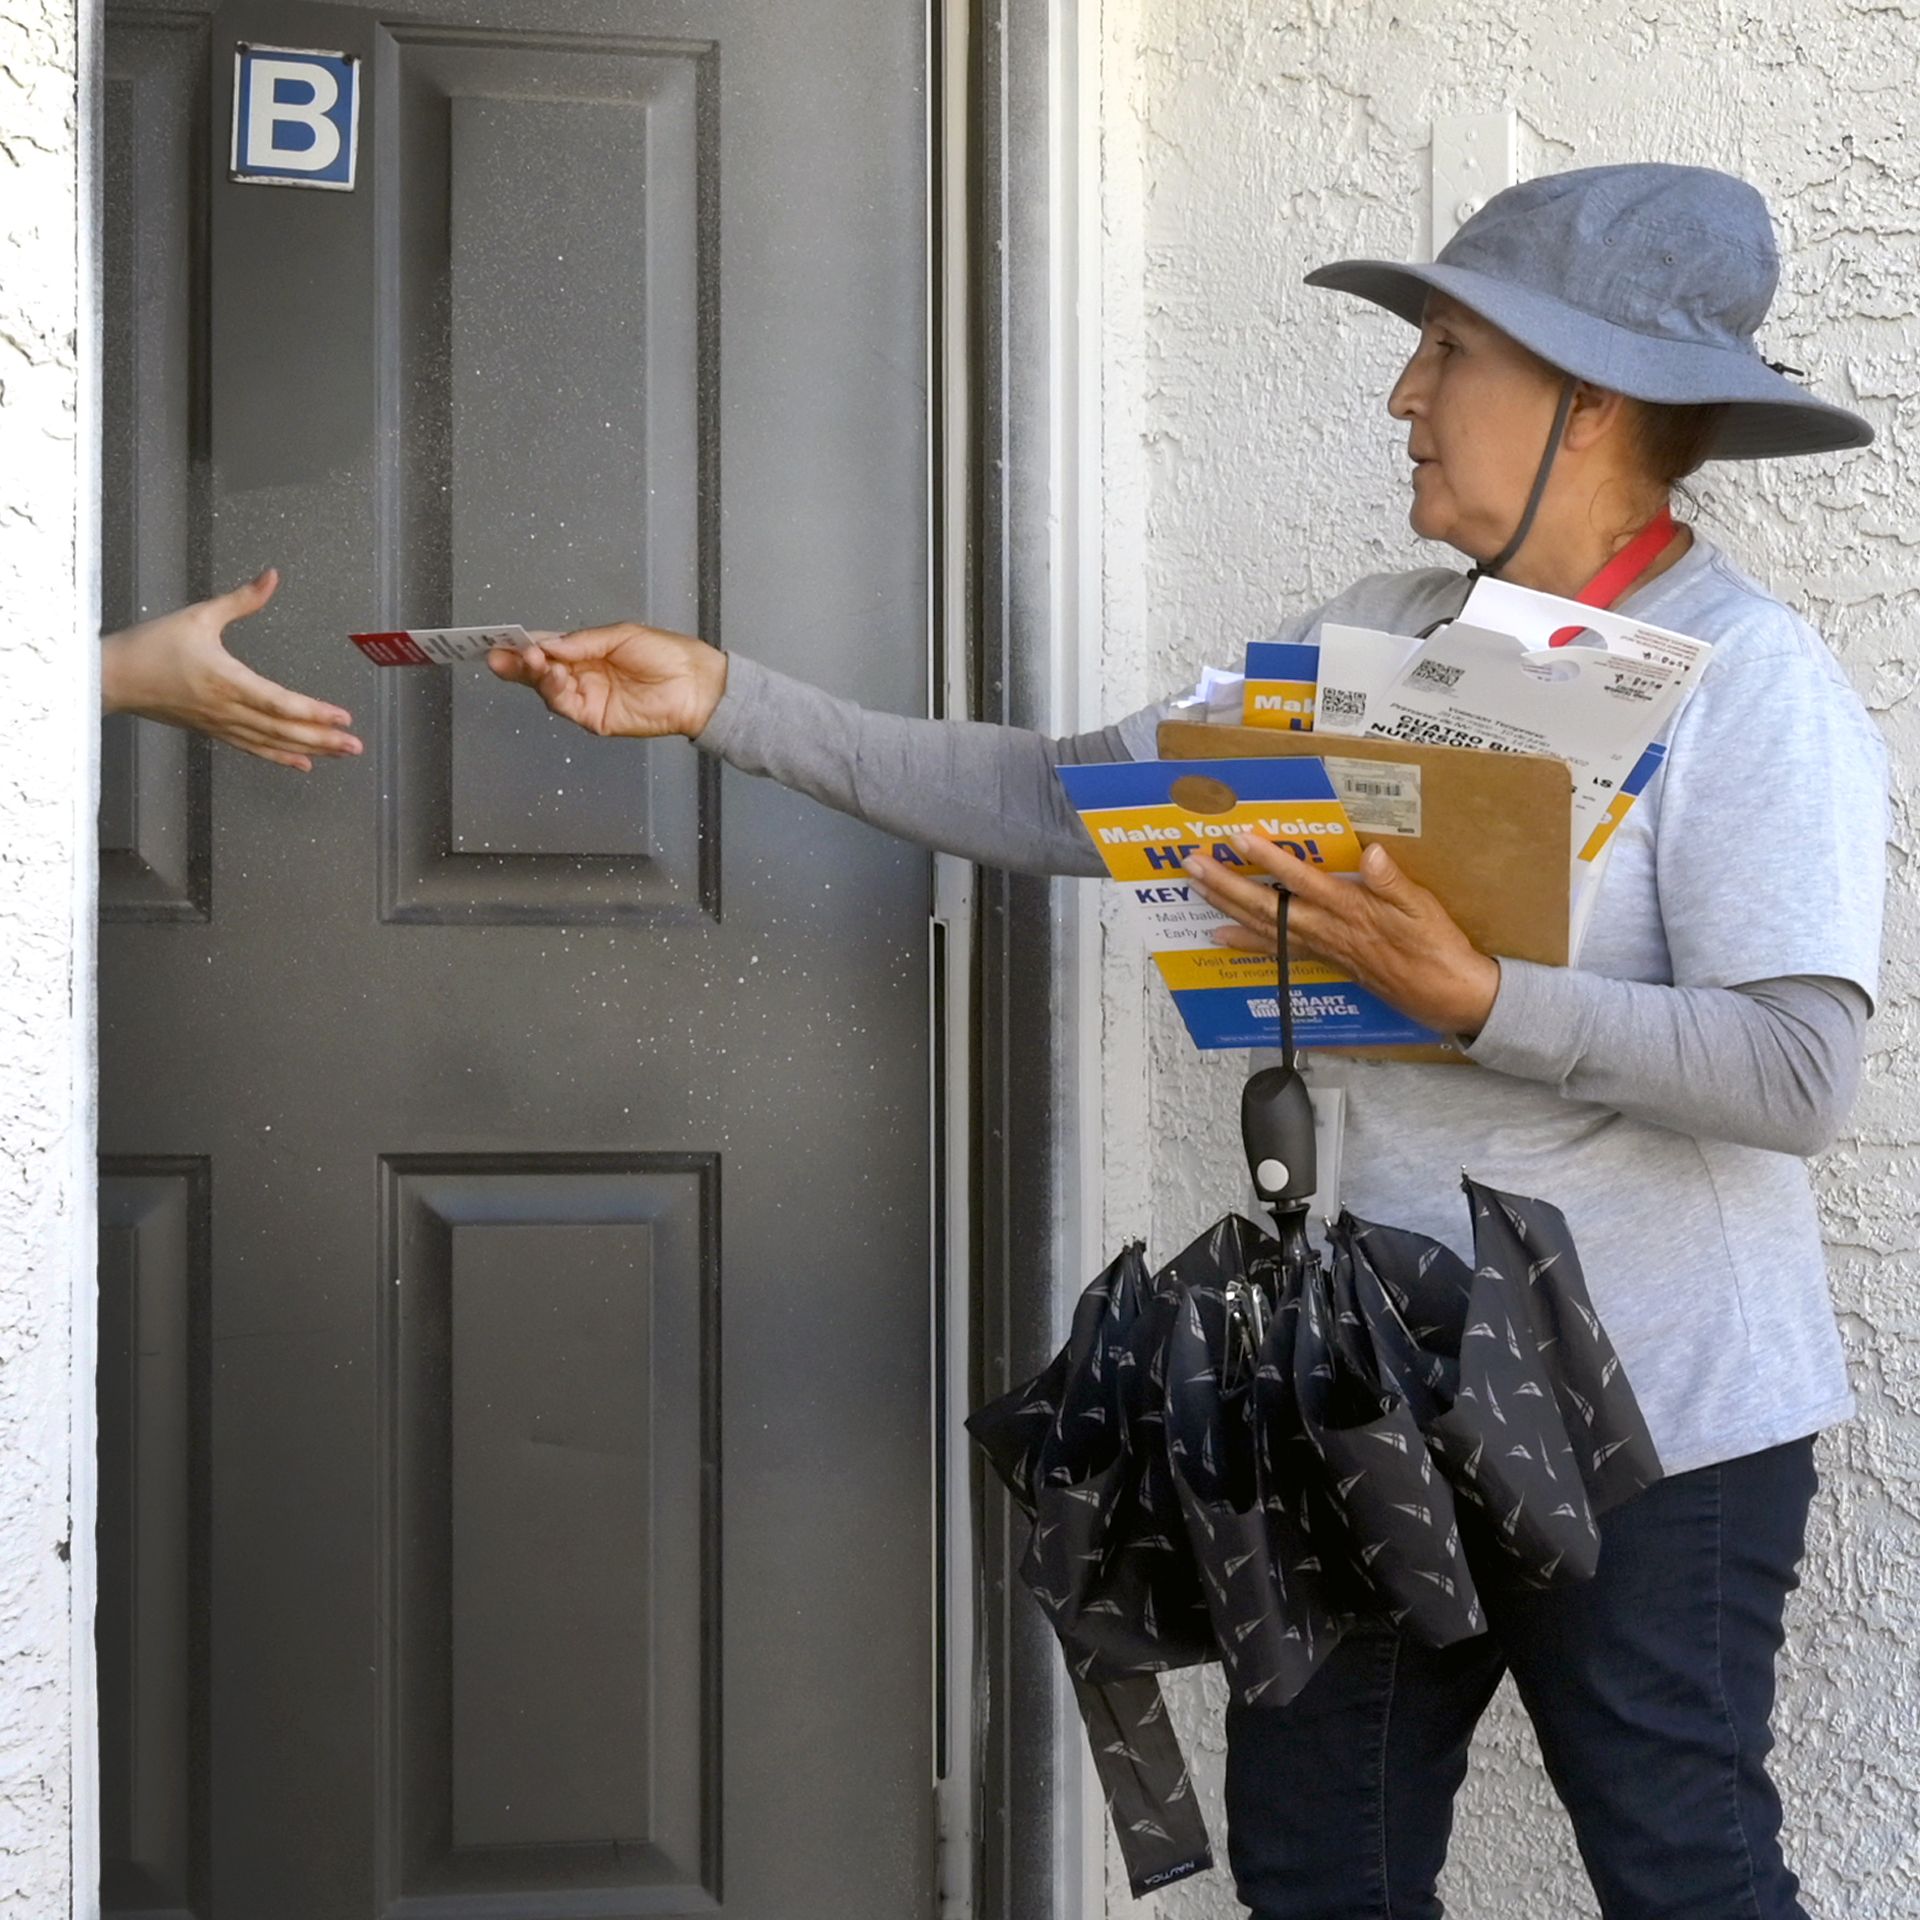 A Culinary Union member in Nevada canvasses voters at an apartment complex, carrying multiple pamphlets